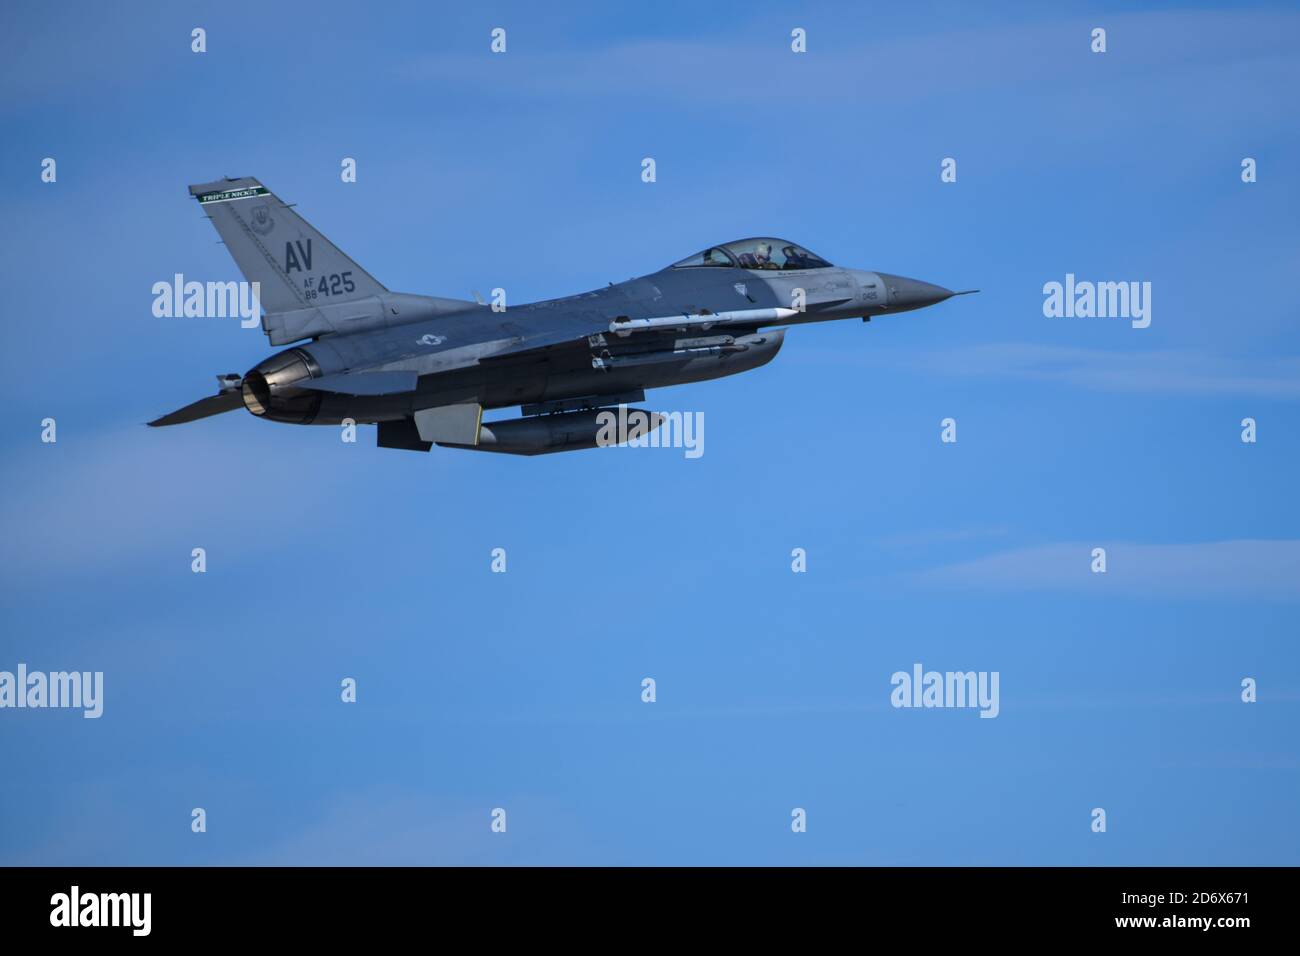 A U.S. Air Force F-16 Fighting Falcon assigned to the 555th Fighter Squadron, Aviano Air Base, Italy, takes flight over Graf Ignatievo Air Base, Bulgaria, during NATO enhanced Air Policing Allied mission, Oct. 15, 2020. Approximately 140 personnel and six F-16s from the 555th Fighter Squadron deployed in support of the Allied mission. The presence of U.S. fighter aircraft in Bulgaria demonstrates NATO nations working together, maintaining and developing effectiveness at all levels, sharing risks, burdens and costs. (U.S. Air Force photo by Airman 1st Class Ericka A. Woolever) Stock Photo